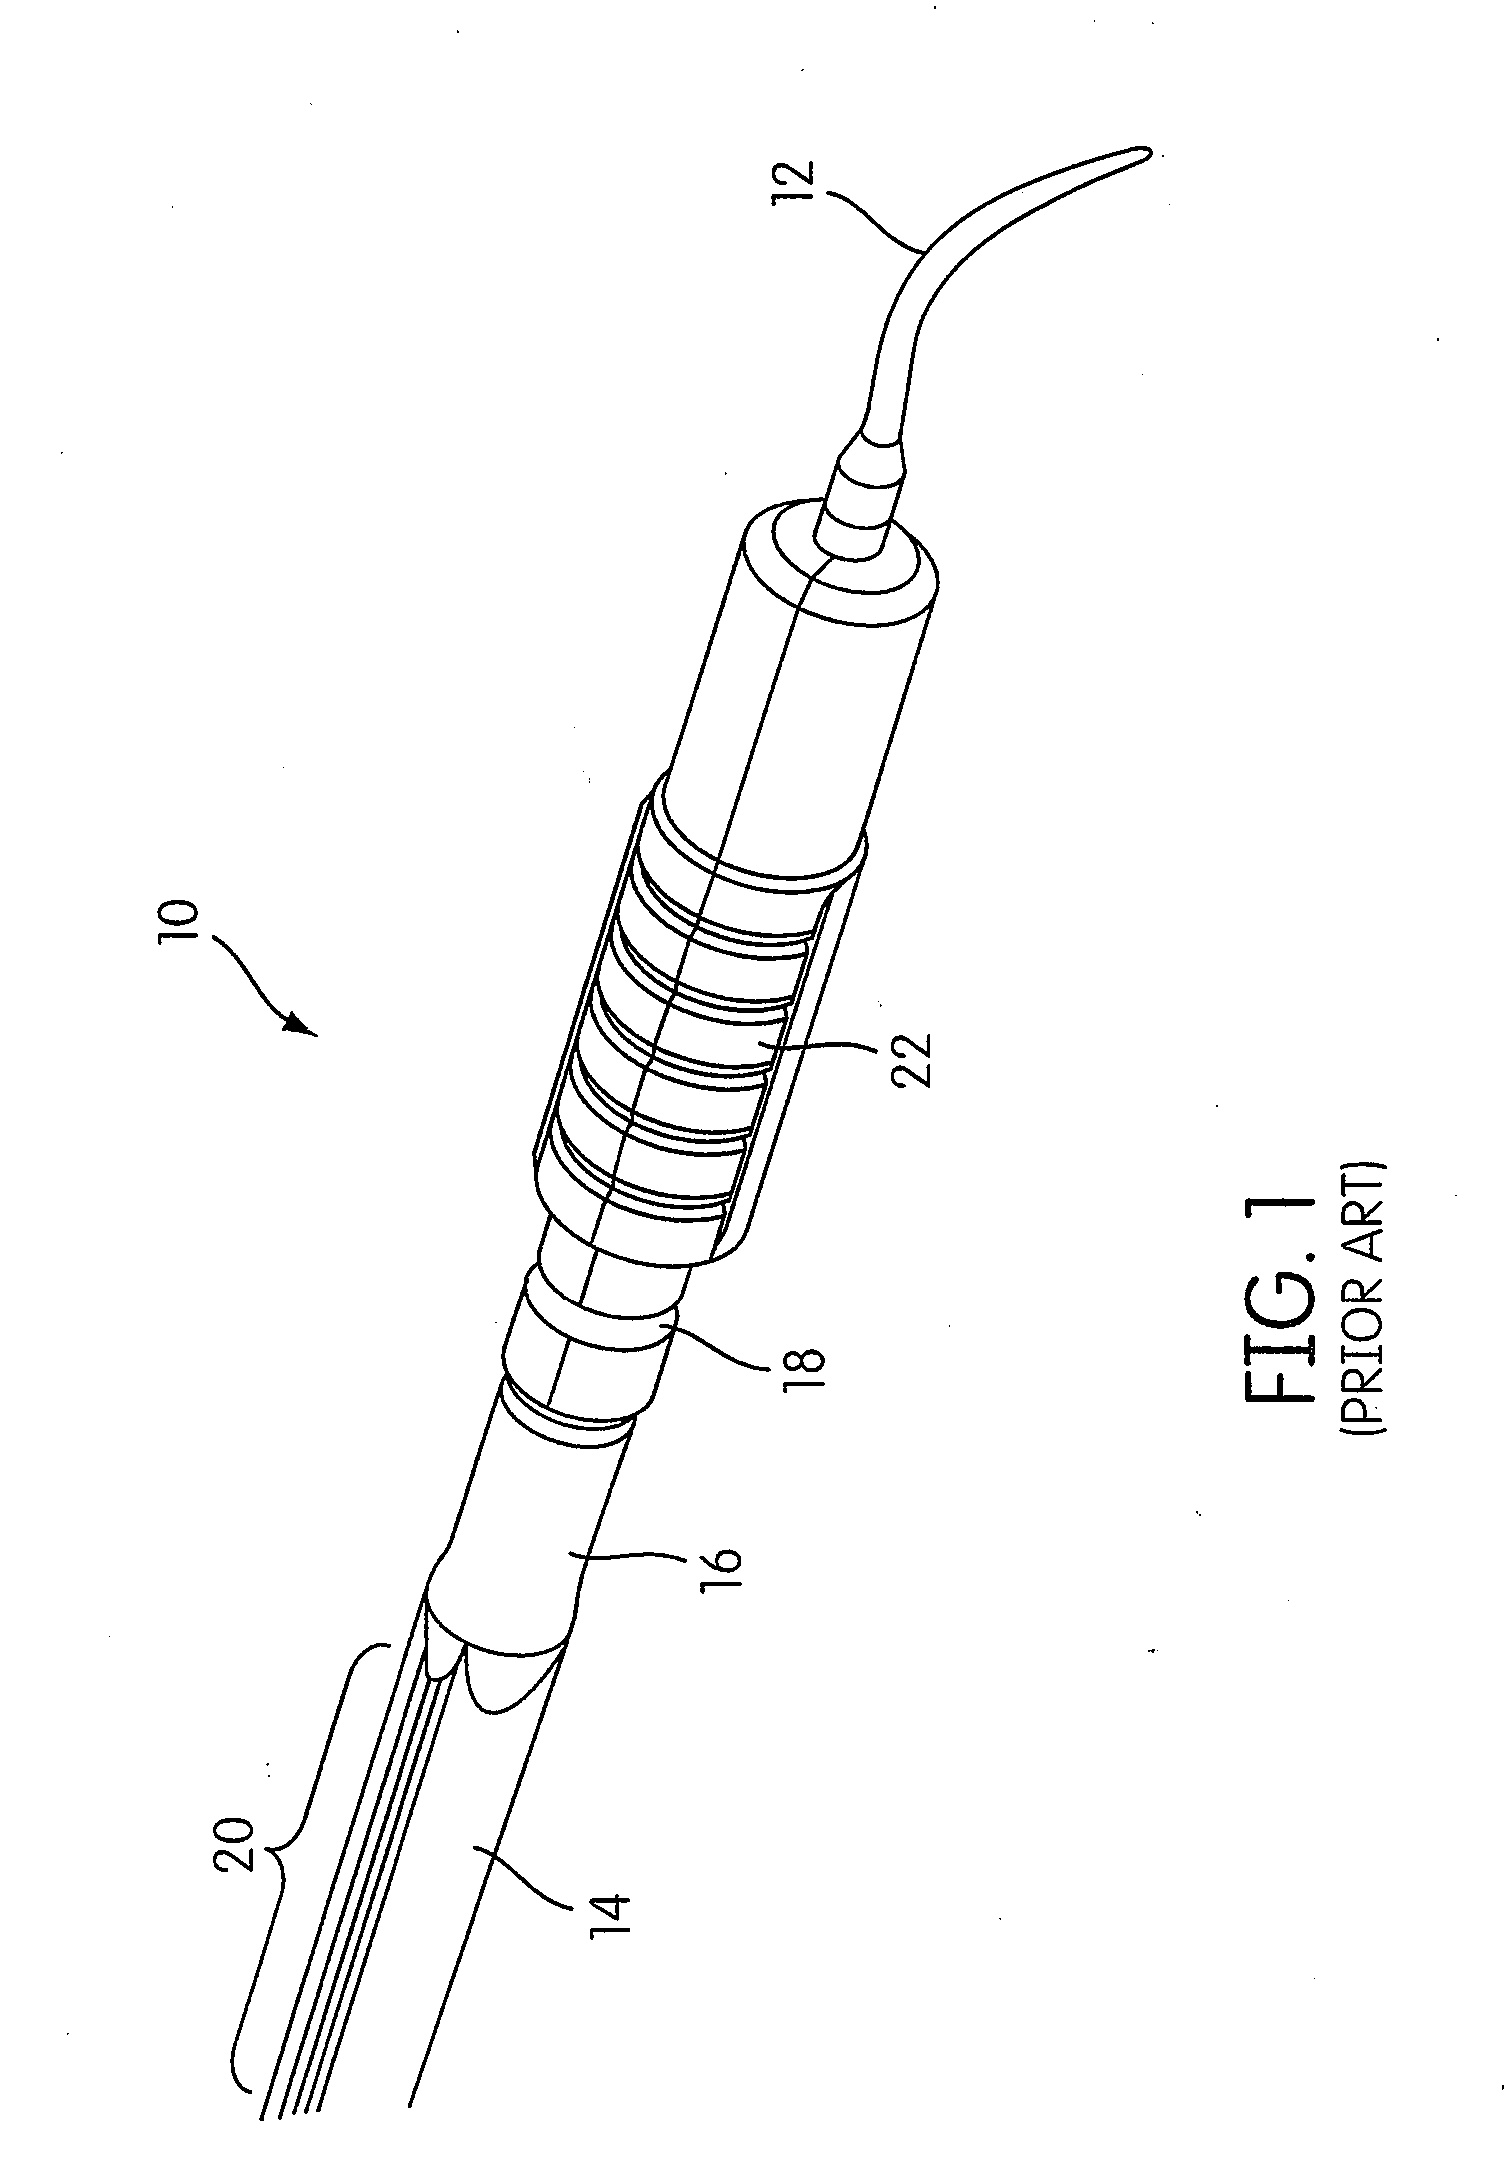 Ultrasonic dental insert and lighted handpiece assembly